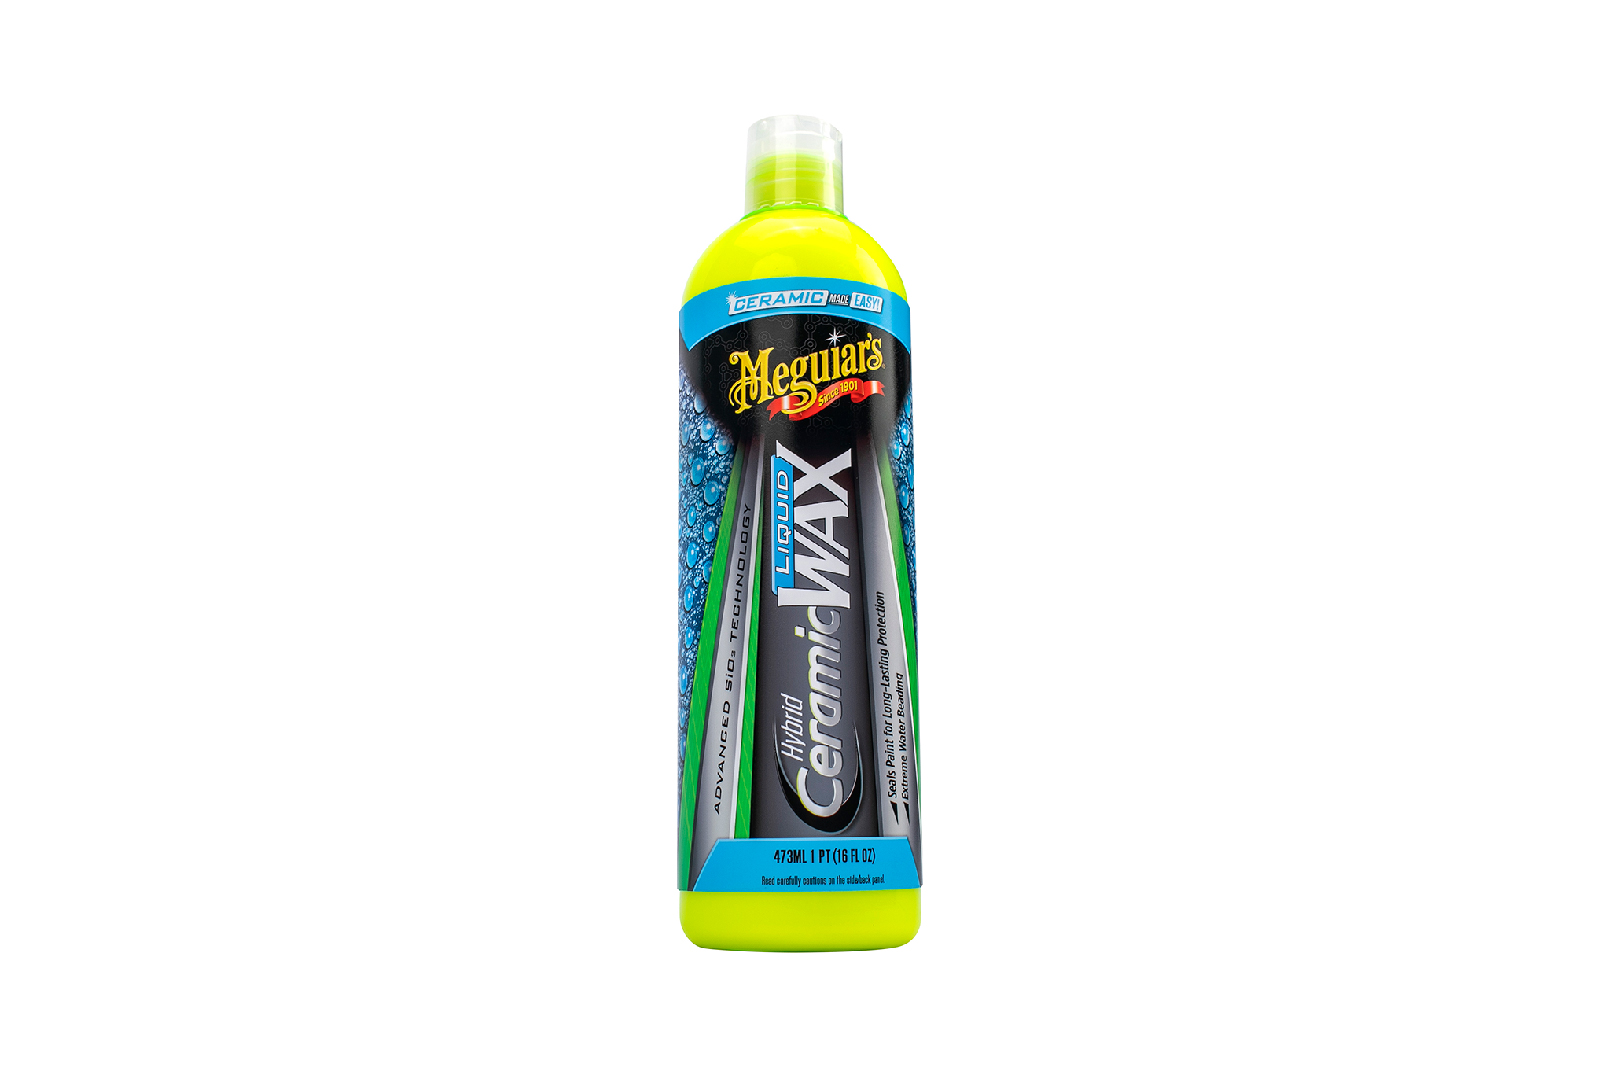 Meguiar's launches new professional products at SEMA Show